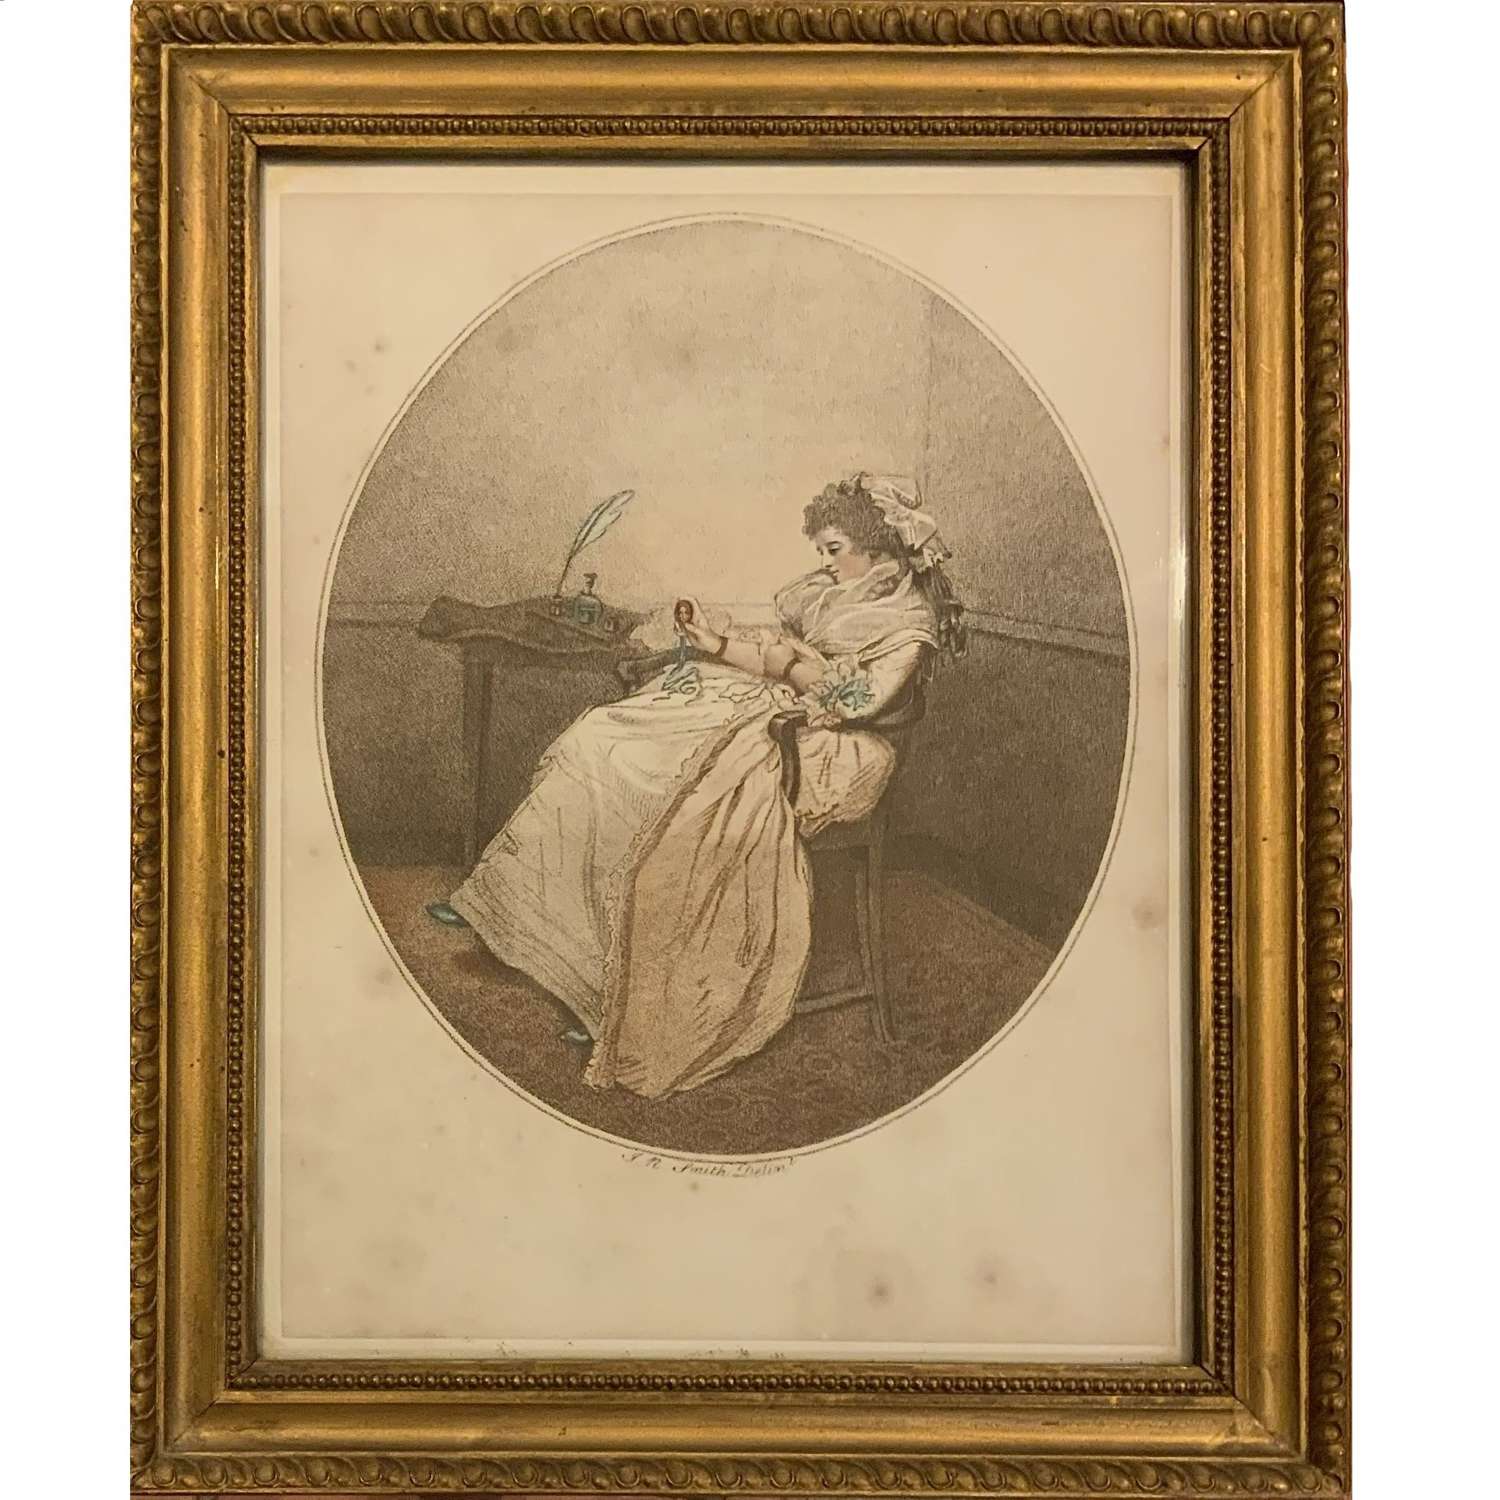 John Raphael Smith (1751–1812), “Contemplating the Picture”, c. 1785